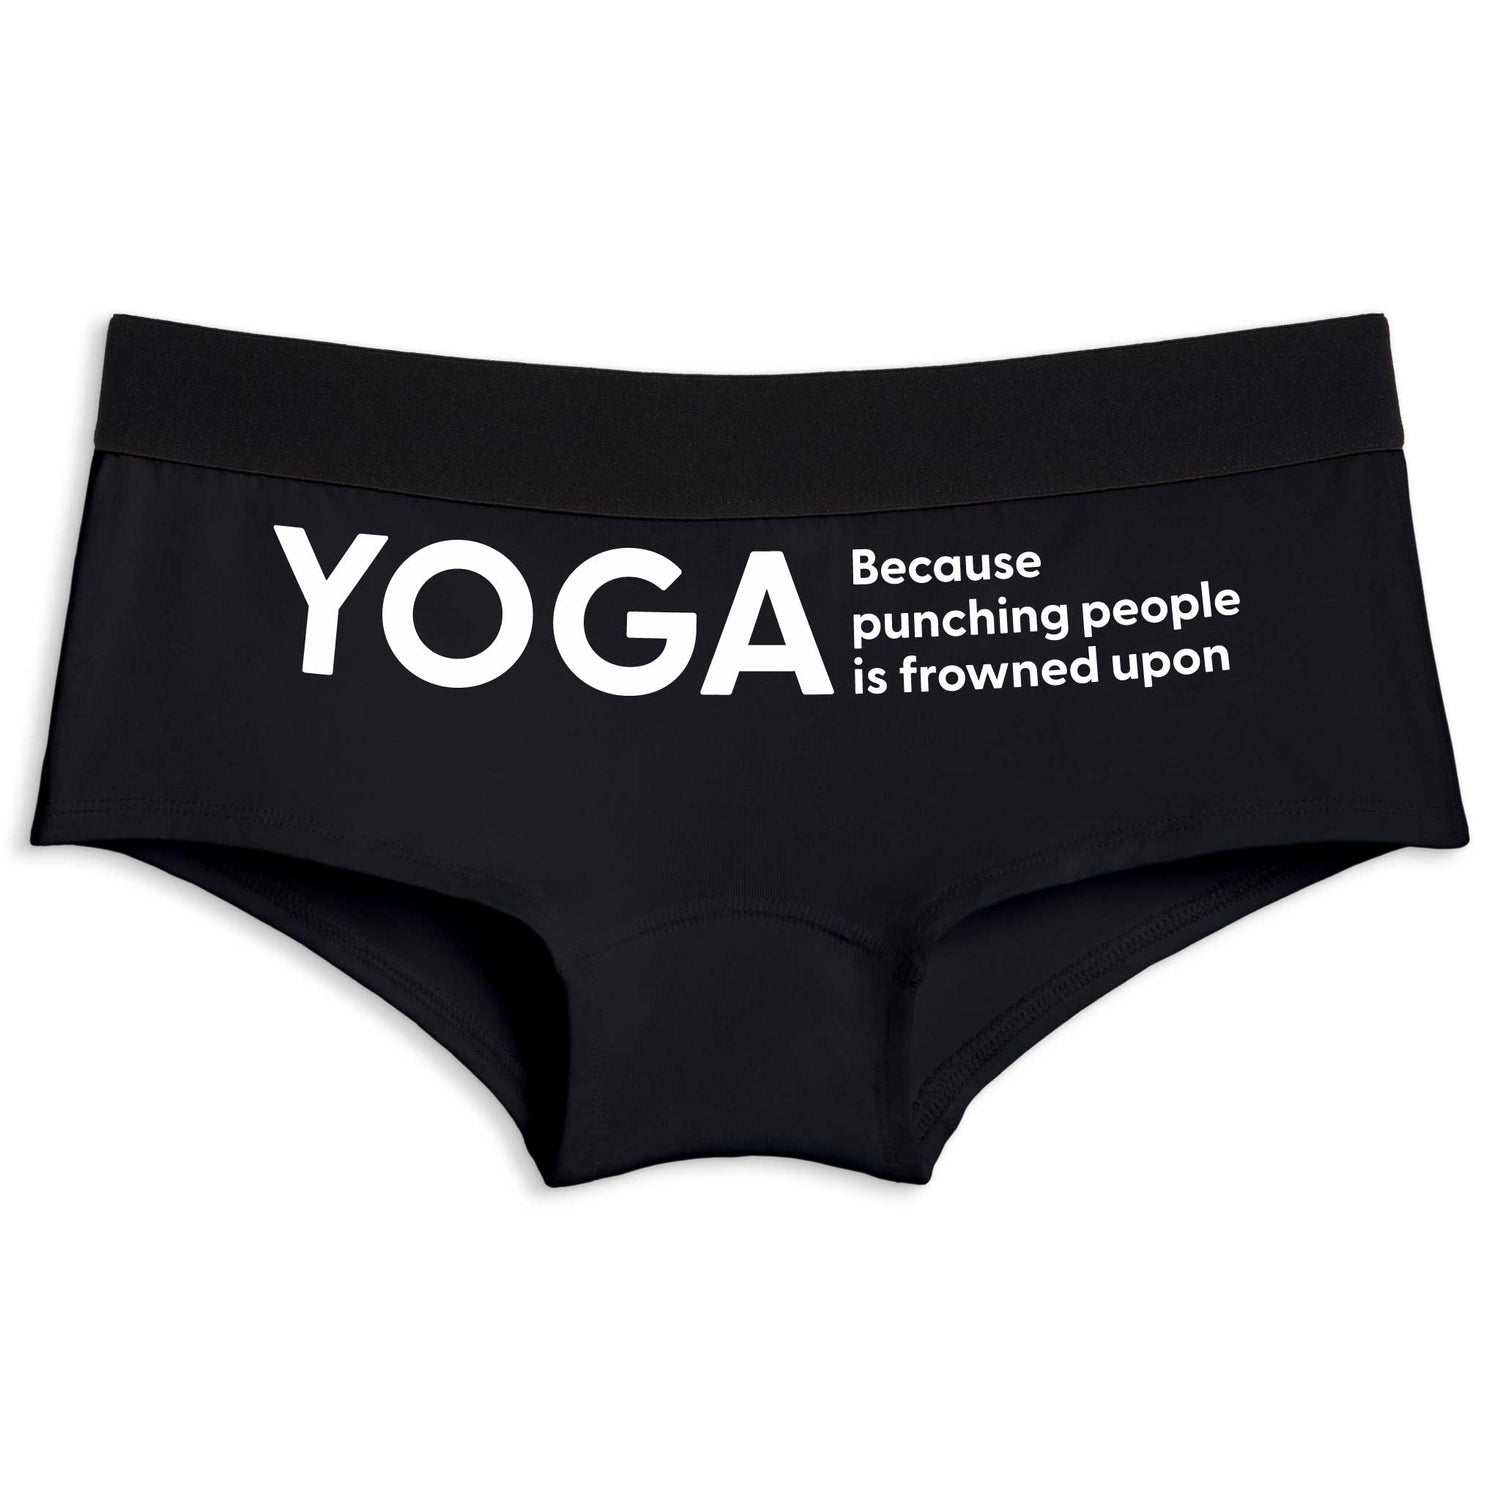 Yoga. Because Punching People Is Frowned Upon | Boyshort Underwear